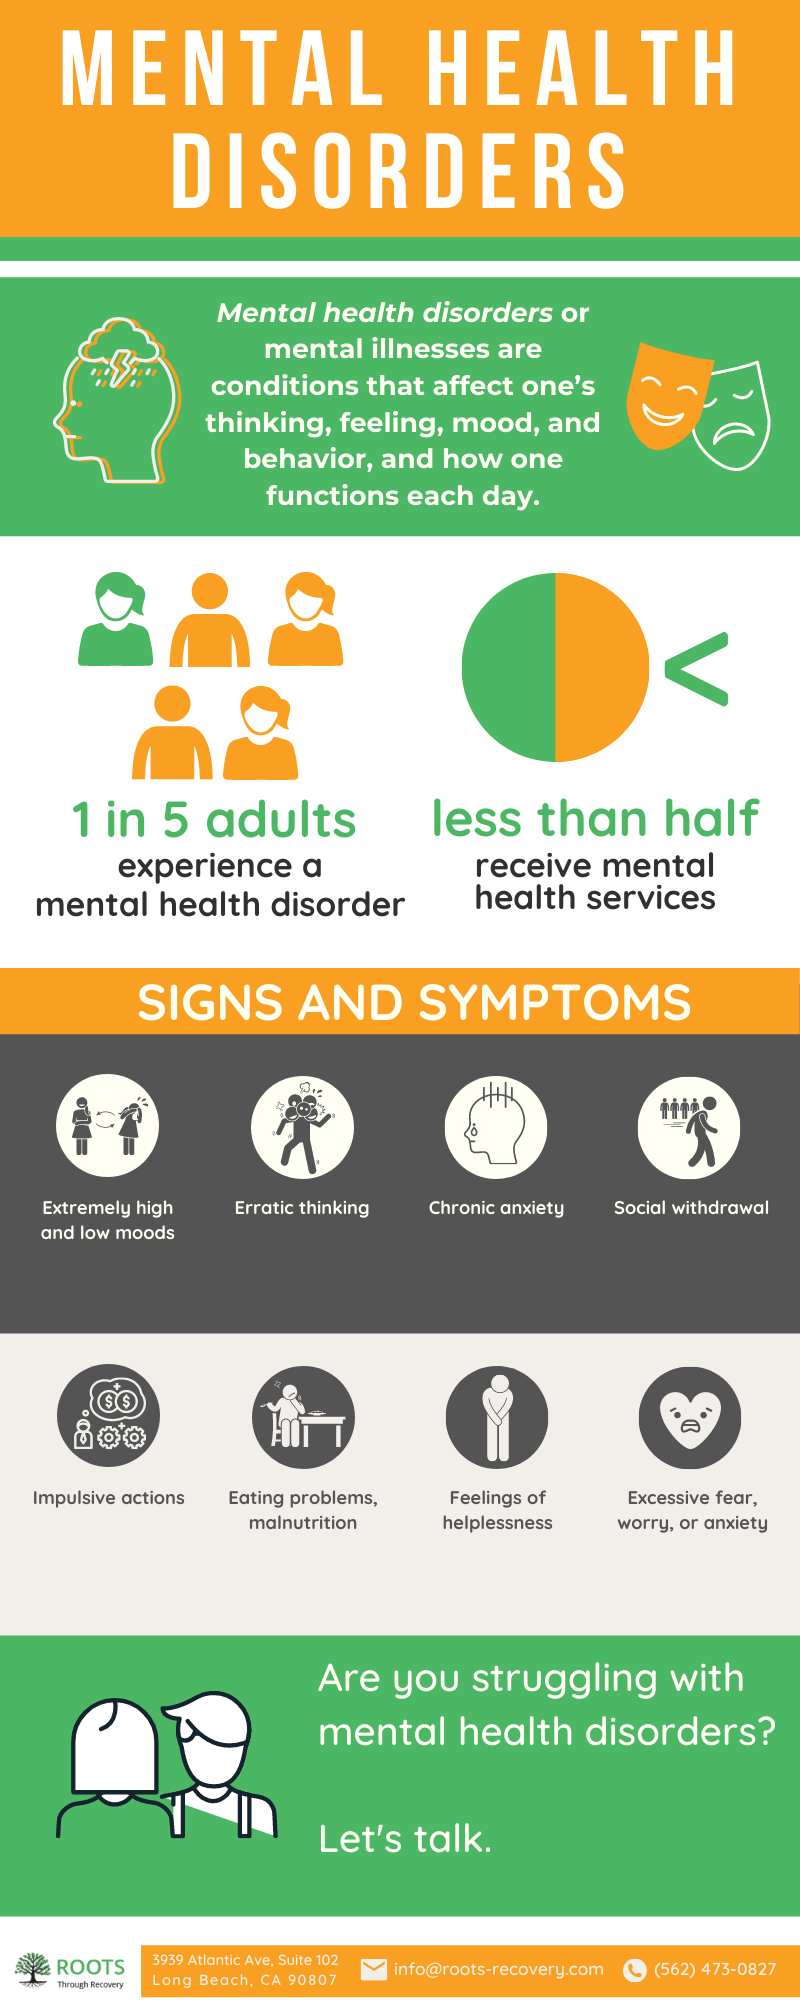 ADHD Infographic